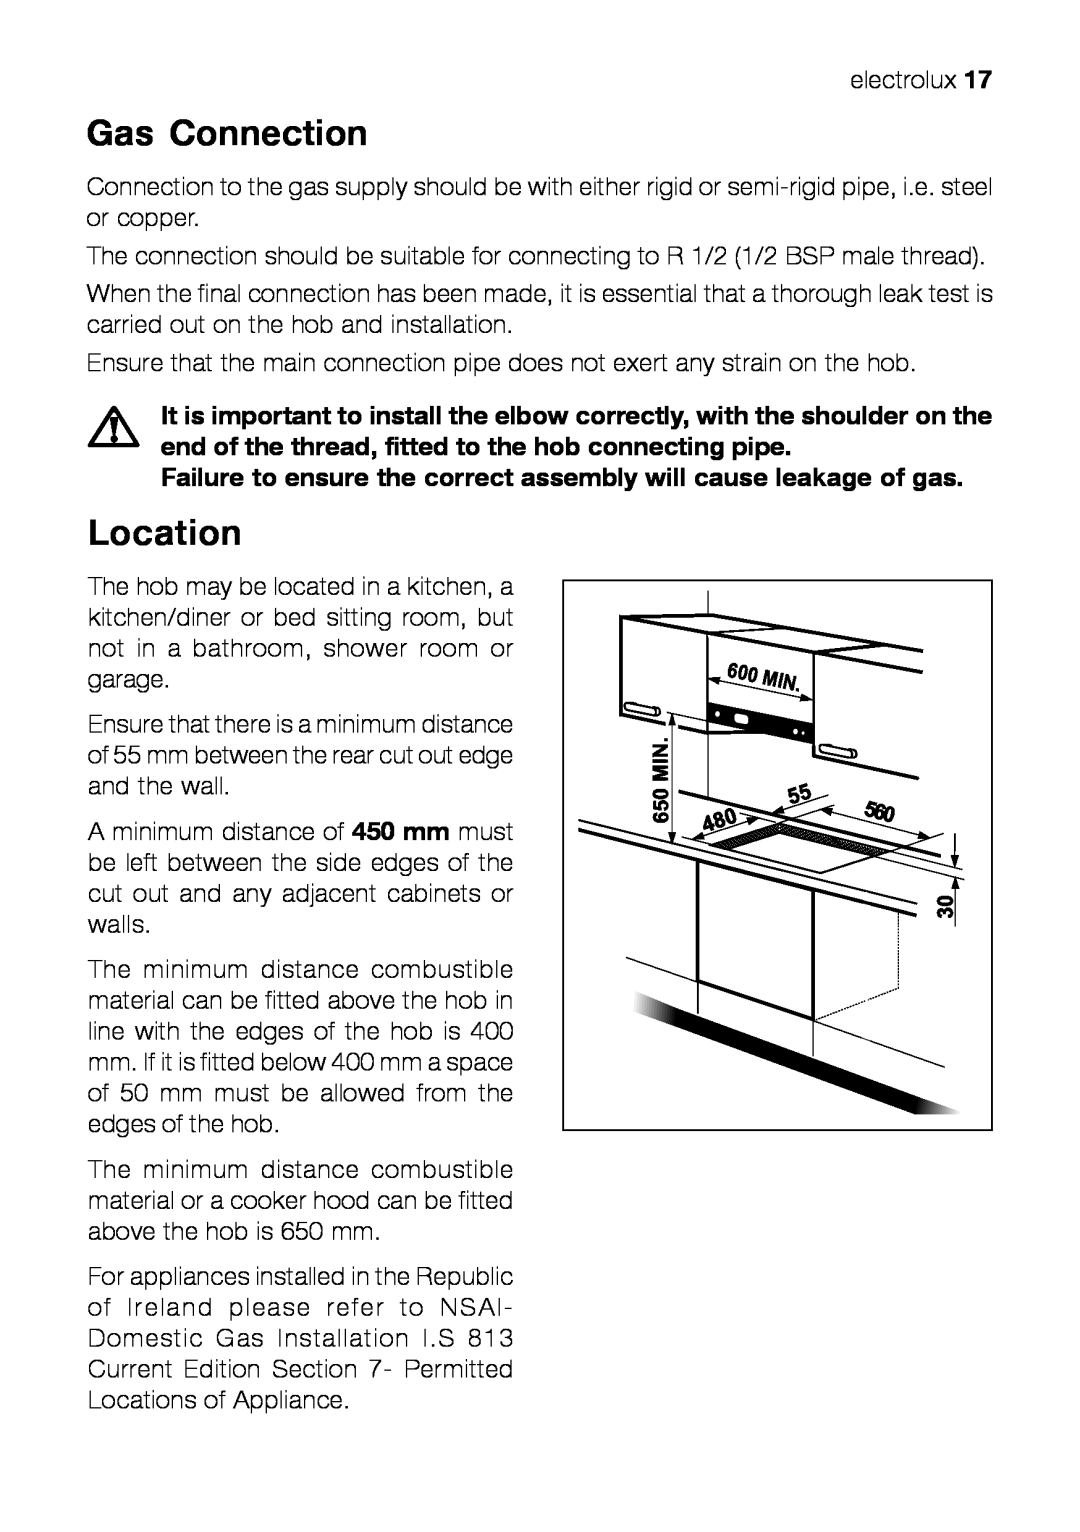 Electrolux EHT 60410 manual Gas Connection, Location, Failure to ensure the correct assembly will cause leakage of gas 